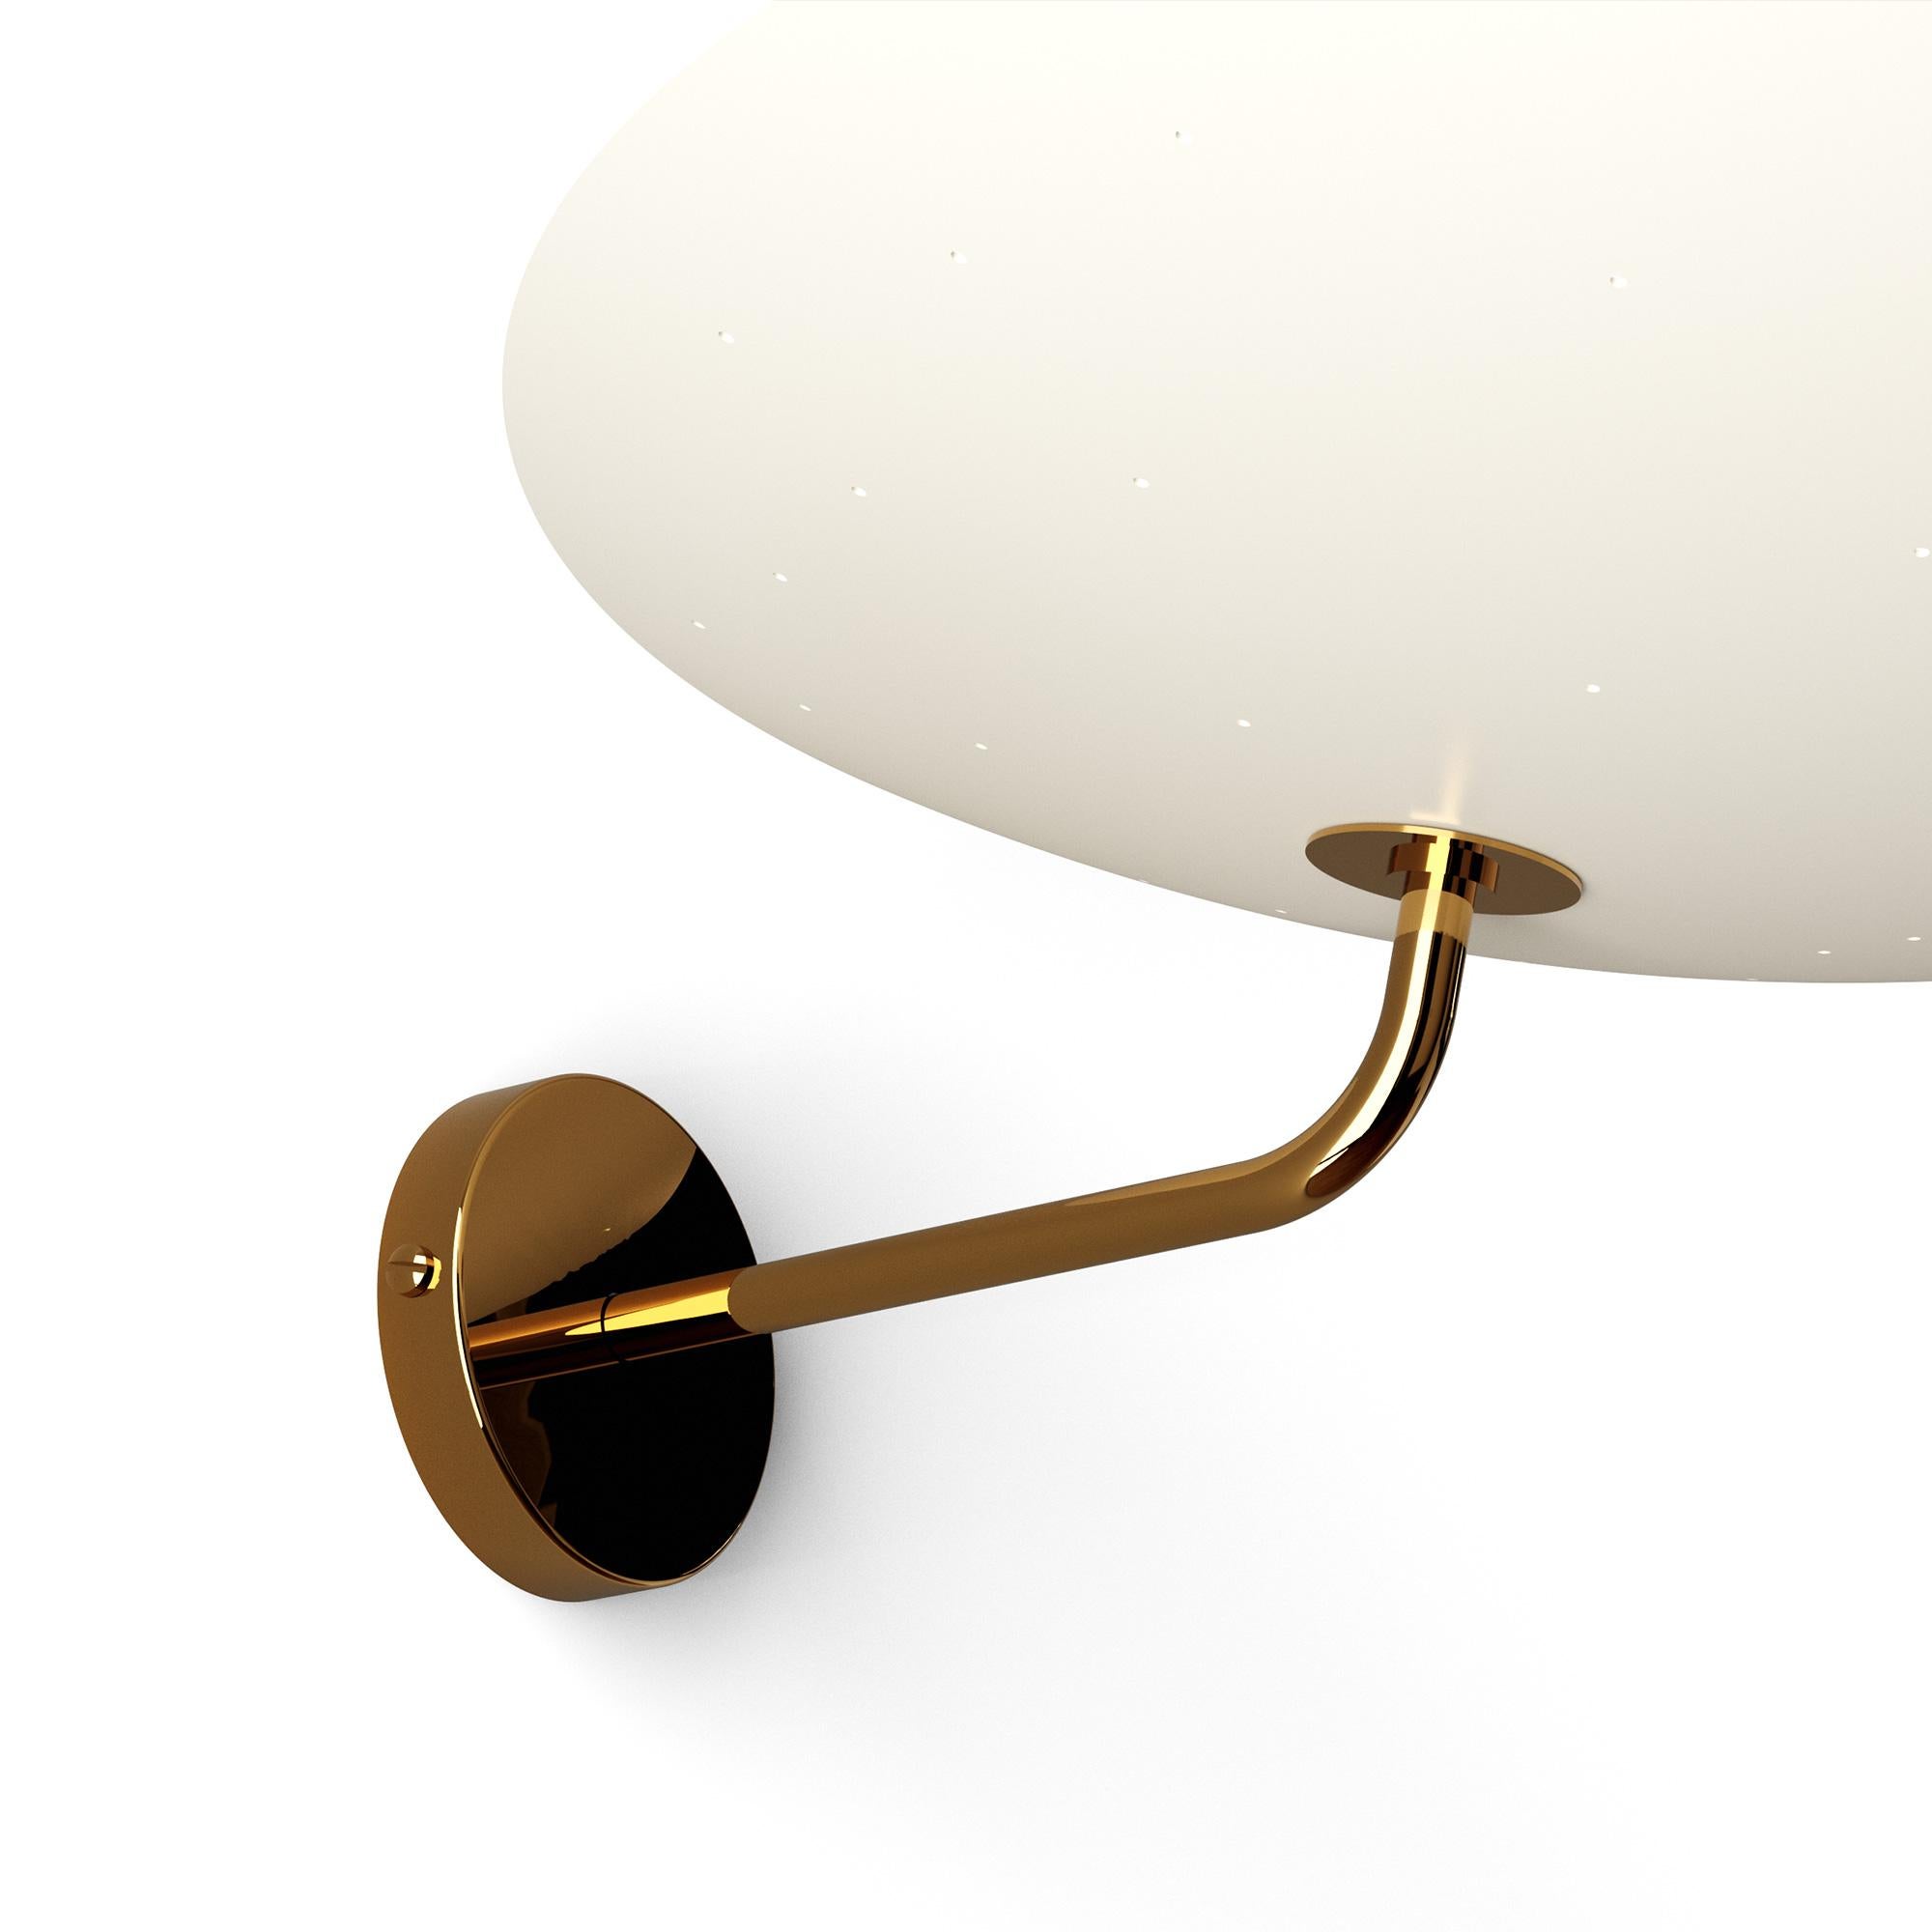 2059 Golden Brass Wall Lamp by Disderot
Limited Edition. 
Designed by Pierre Disderot.
Dimensions: Ø 40 x H 12 cm.
Materials: Golden brass. 

Delivered with authentication certificate. Made in France. Available in different colors and metal options.